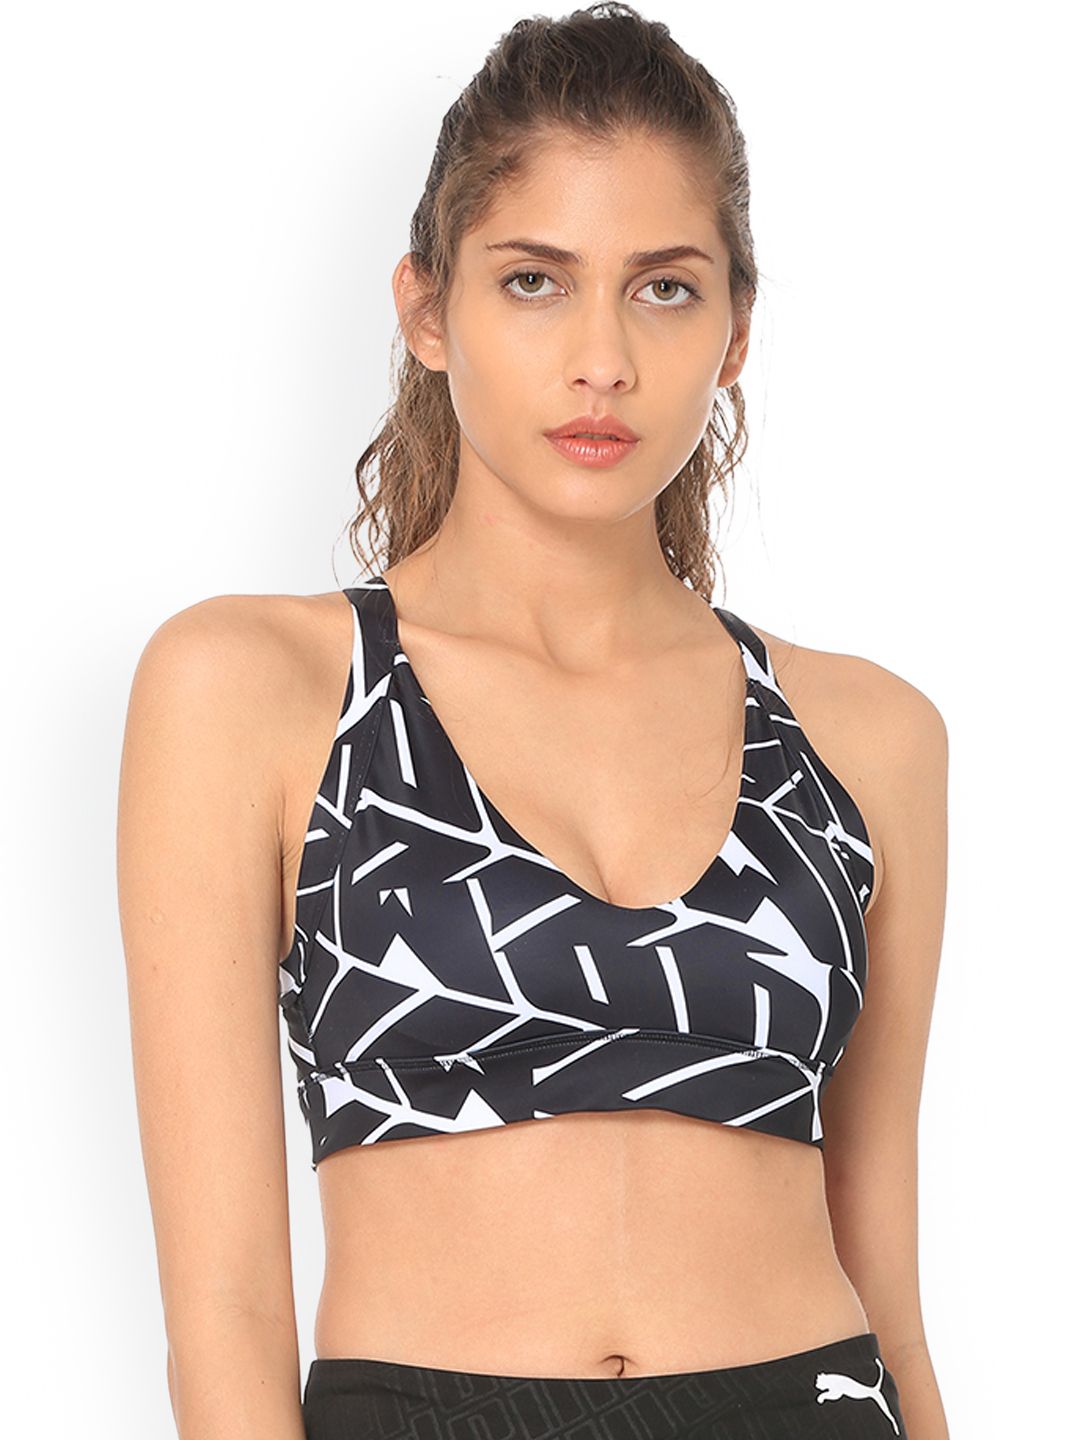 Puma Black & Off-White Printed Non-Wired Lightly Padded Sports Bra 51747501 Price in India